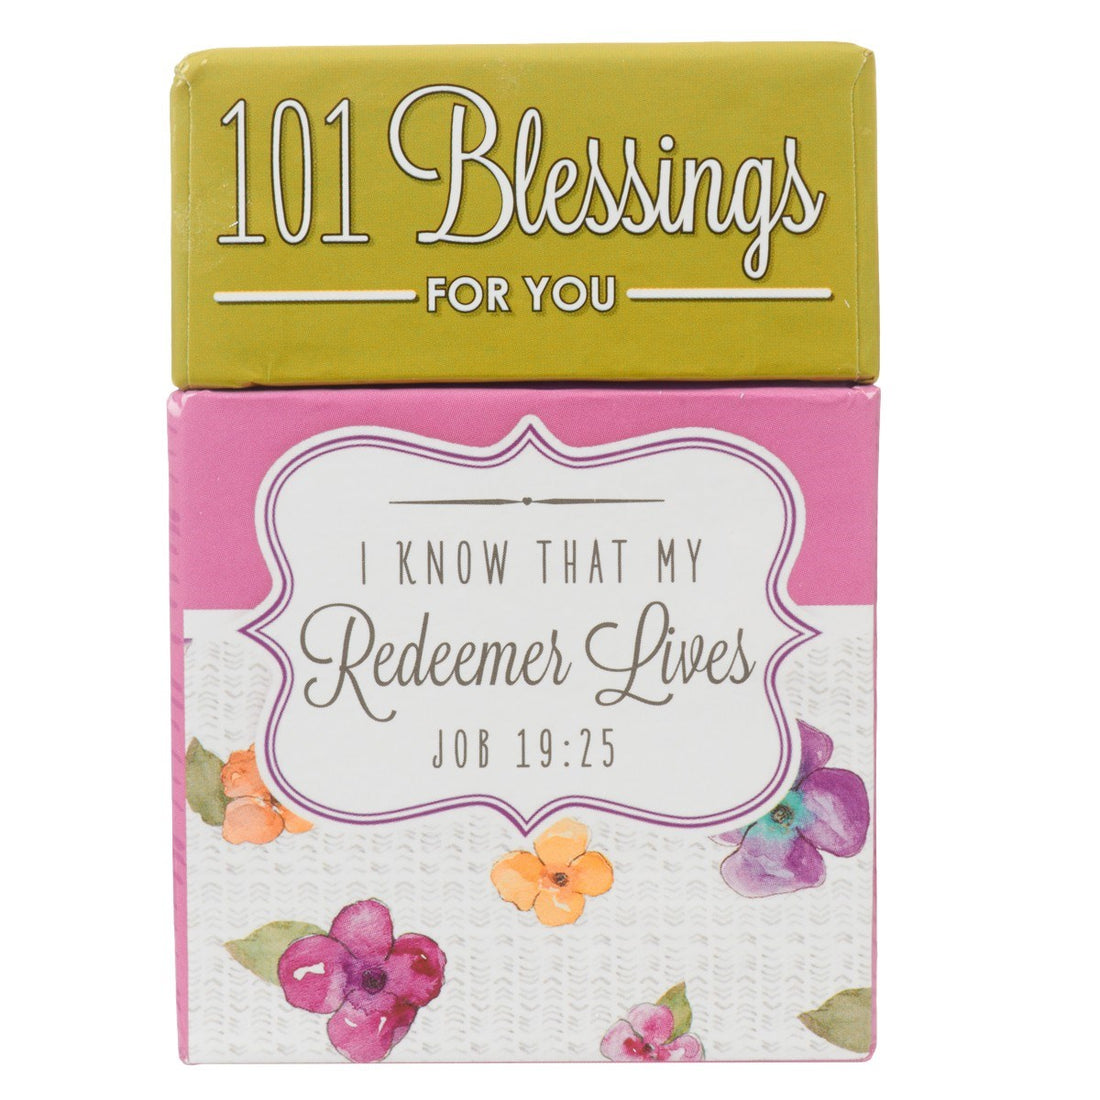 Seed of Abraham Christian Bookstore - (In)Courage - Box Of Blessings-101 Blessings For You